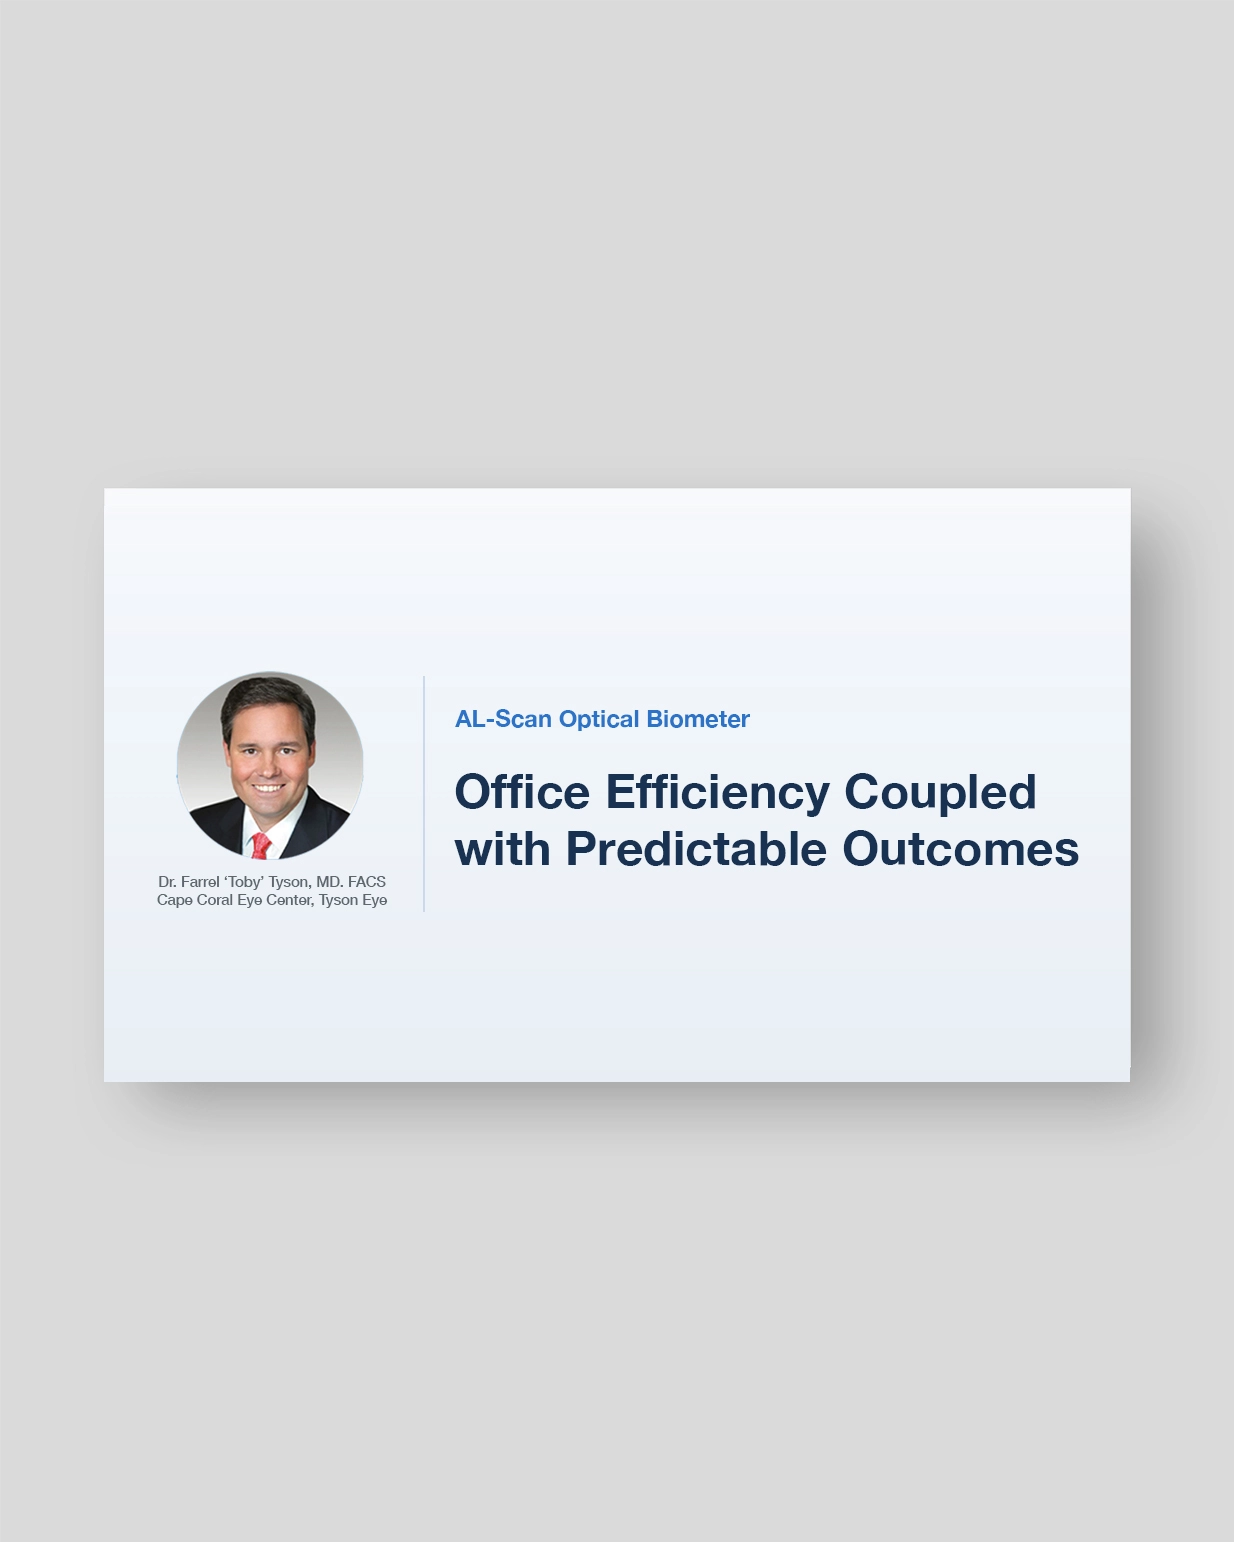 Office Efficiency Coupled with Predictable Outcomes